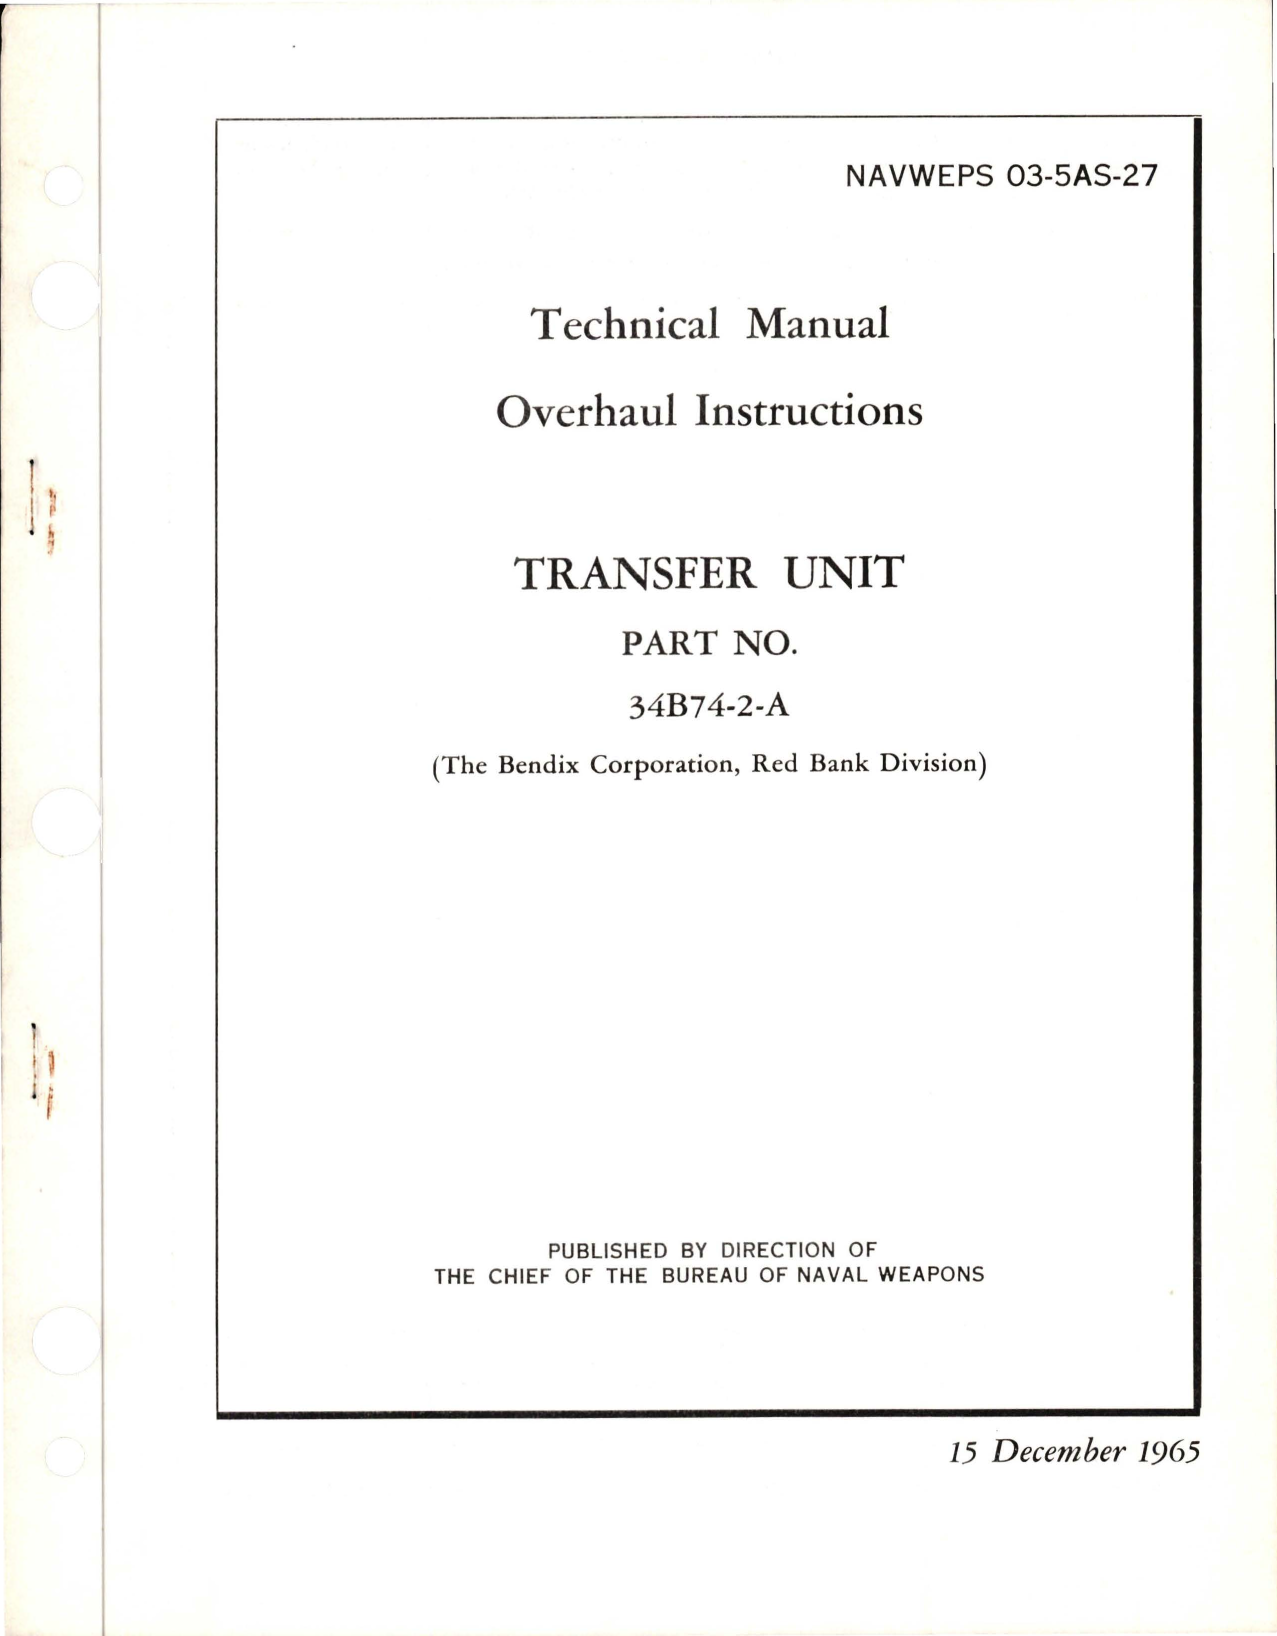 Sample page 1 from AirCorps Library document: Overhaul Instructions for Transfer Unit - Part 34B74-2-A